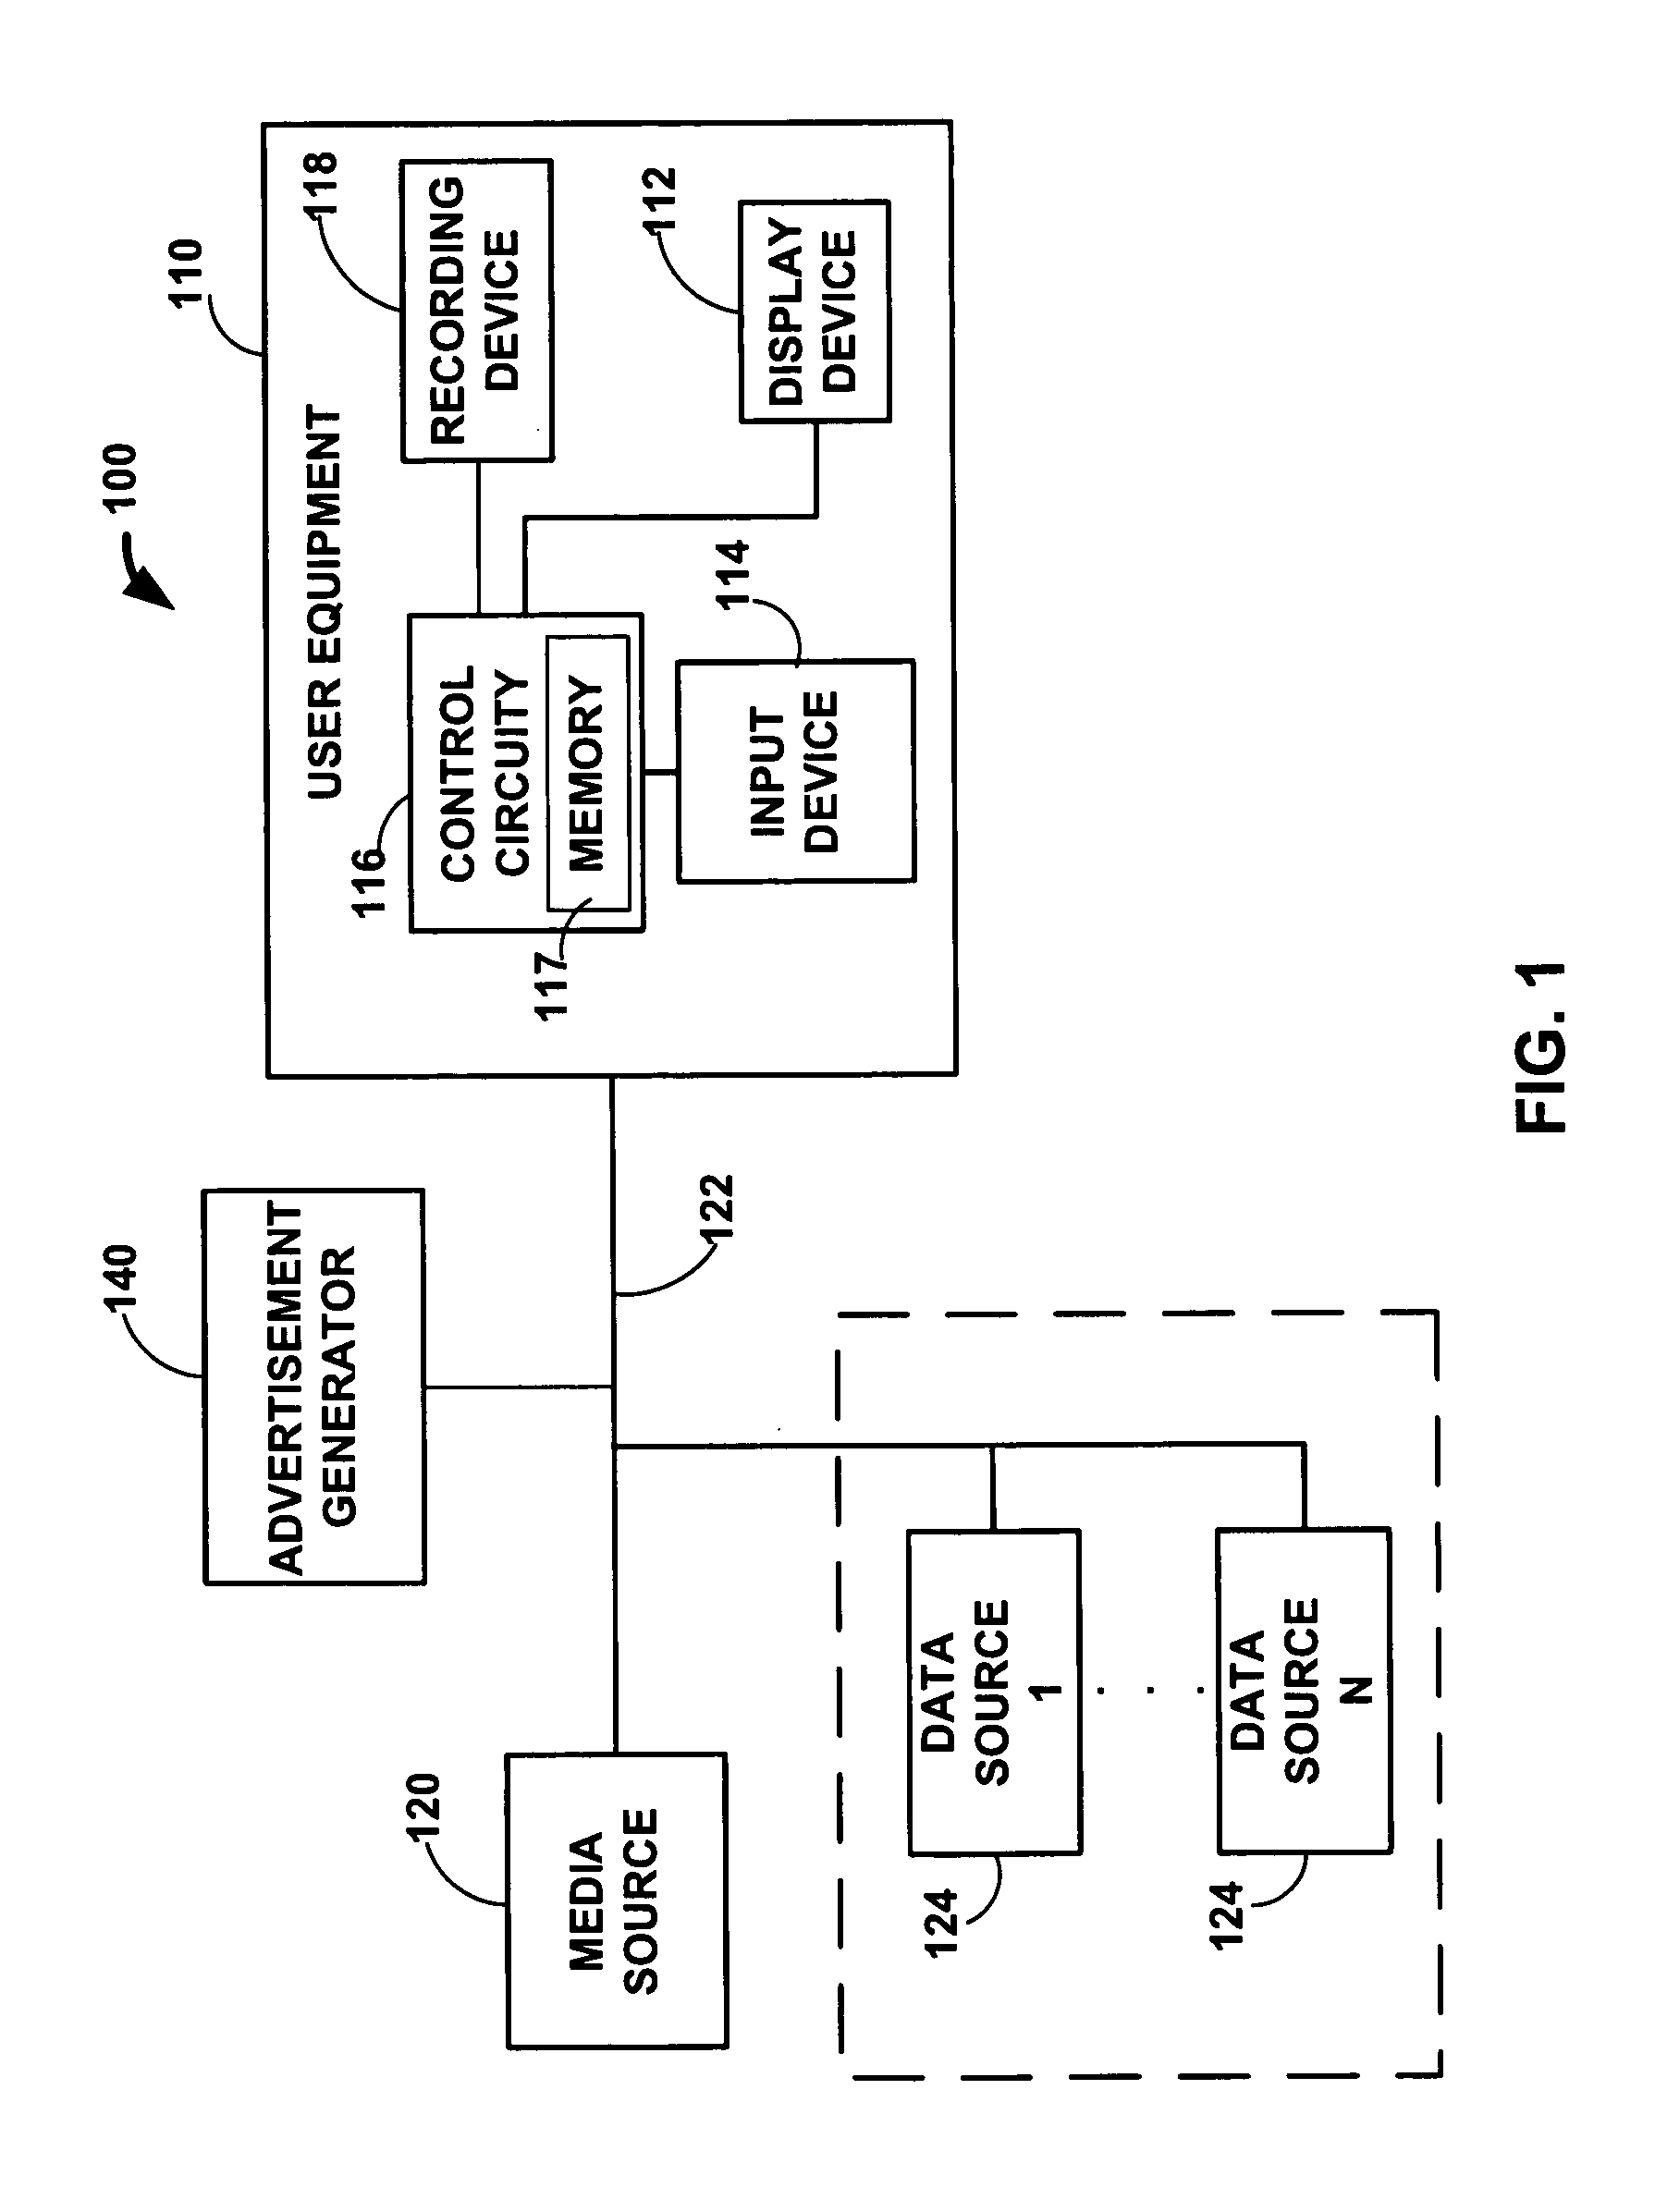 Systems and methods for viewing substitute media while fast forwarding past an advertisement